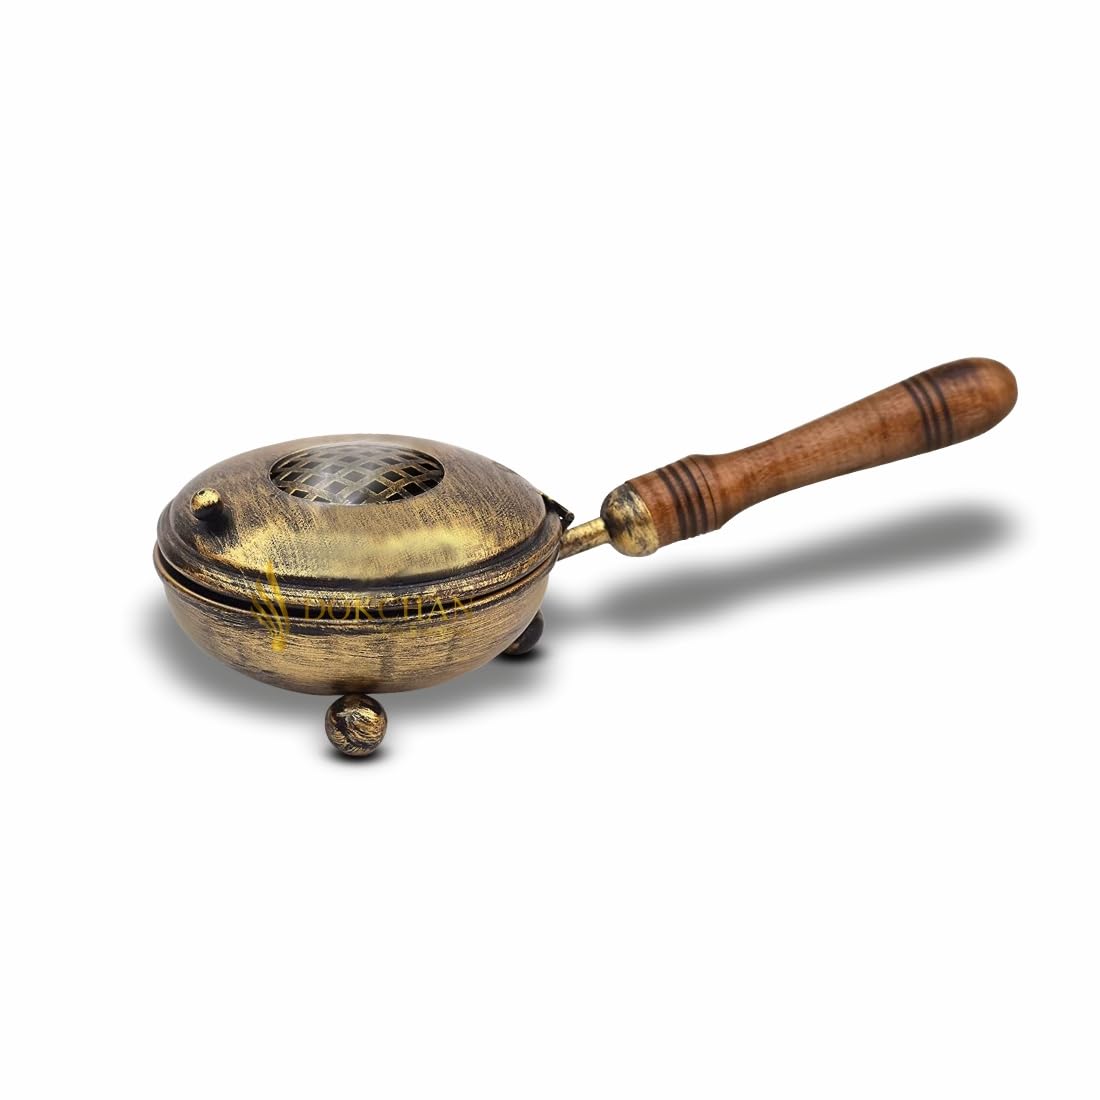 DOKCHAN Copper Iron dhuni with Wooden Holder for Lohan dhoop dhuni, for Pooja, Temple, Home/use Diwali Special Pooja dhoop dhuni with Wooden Holder